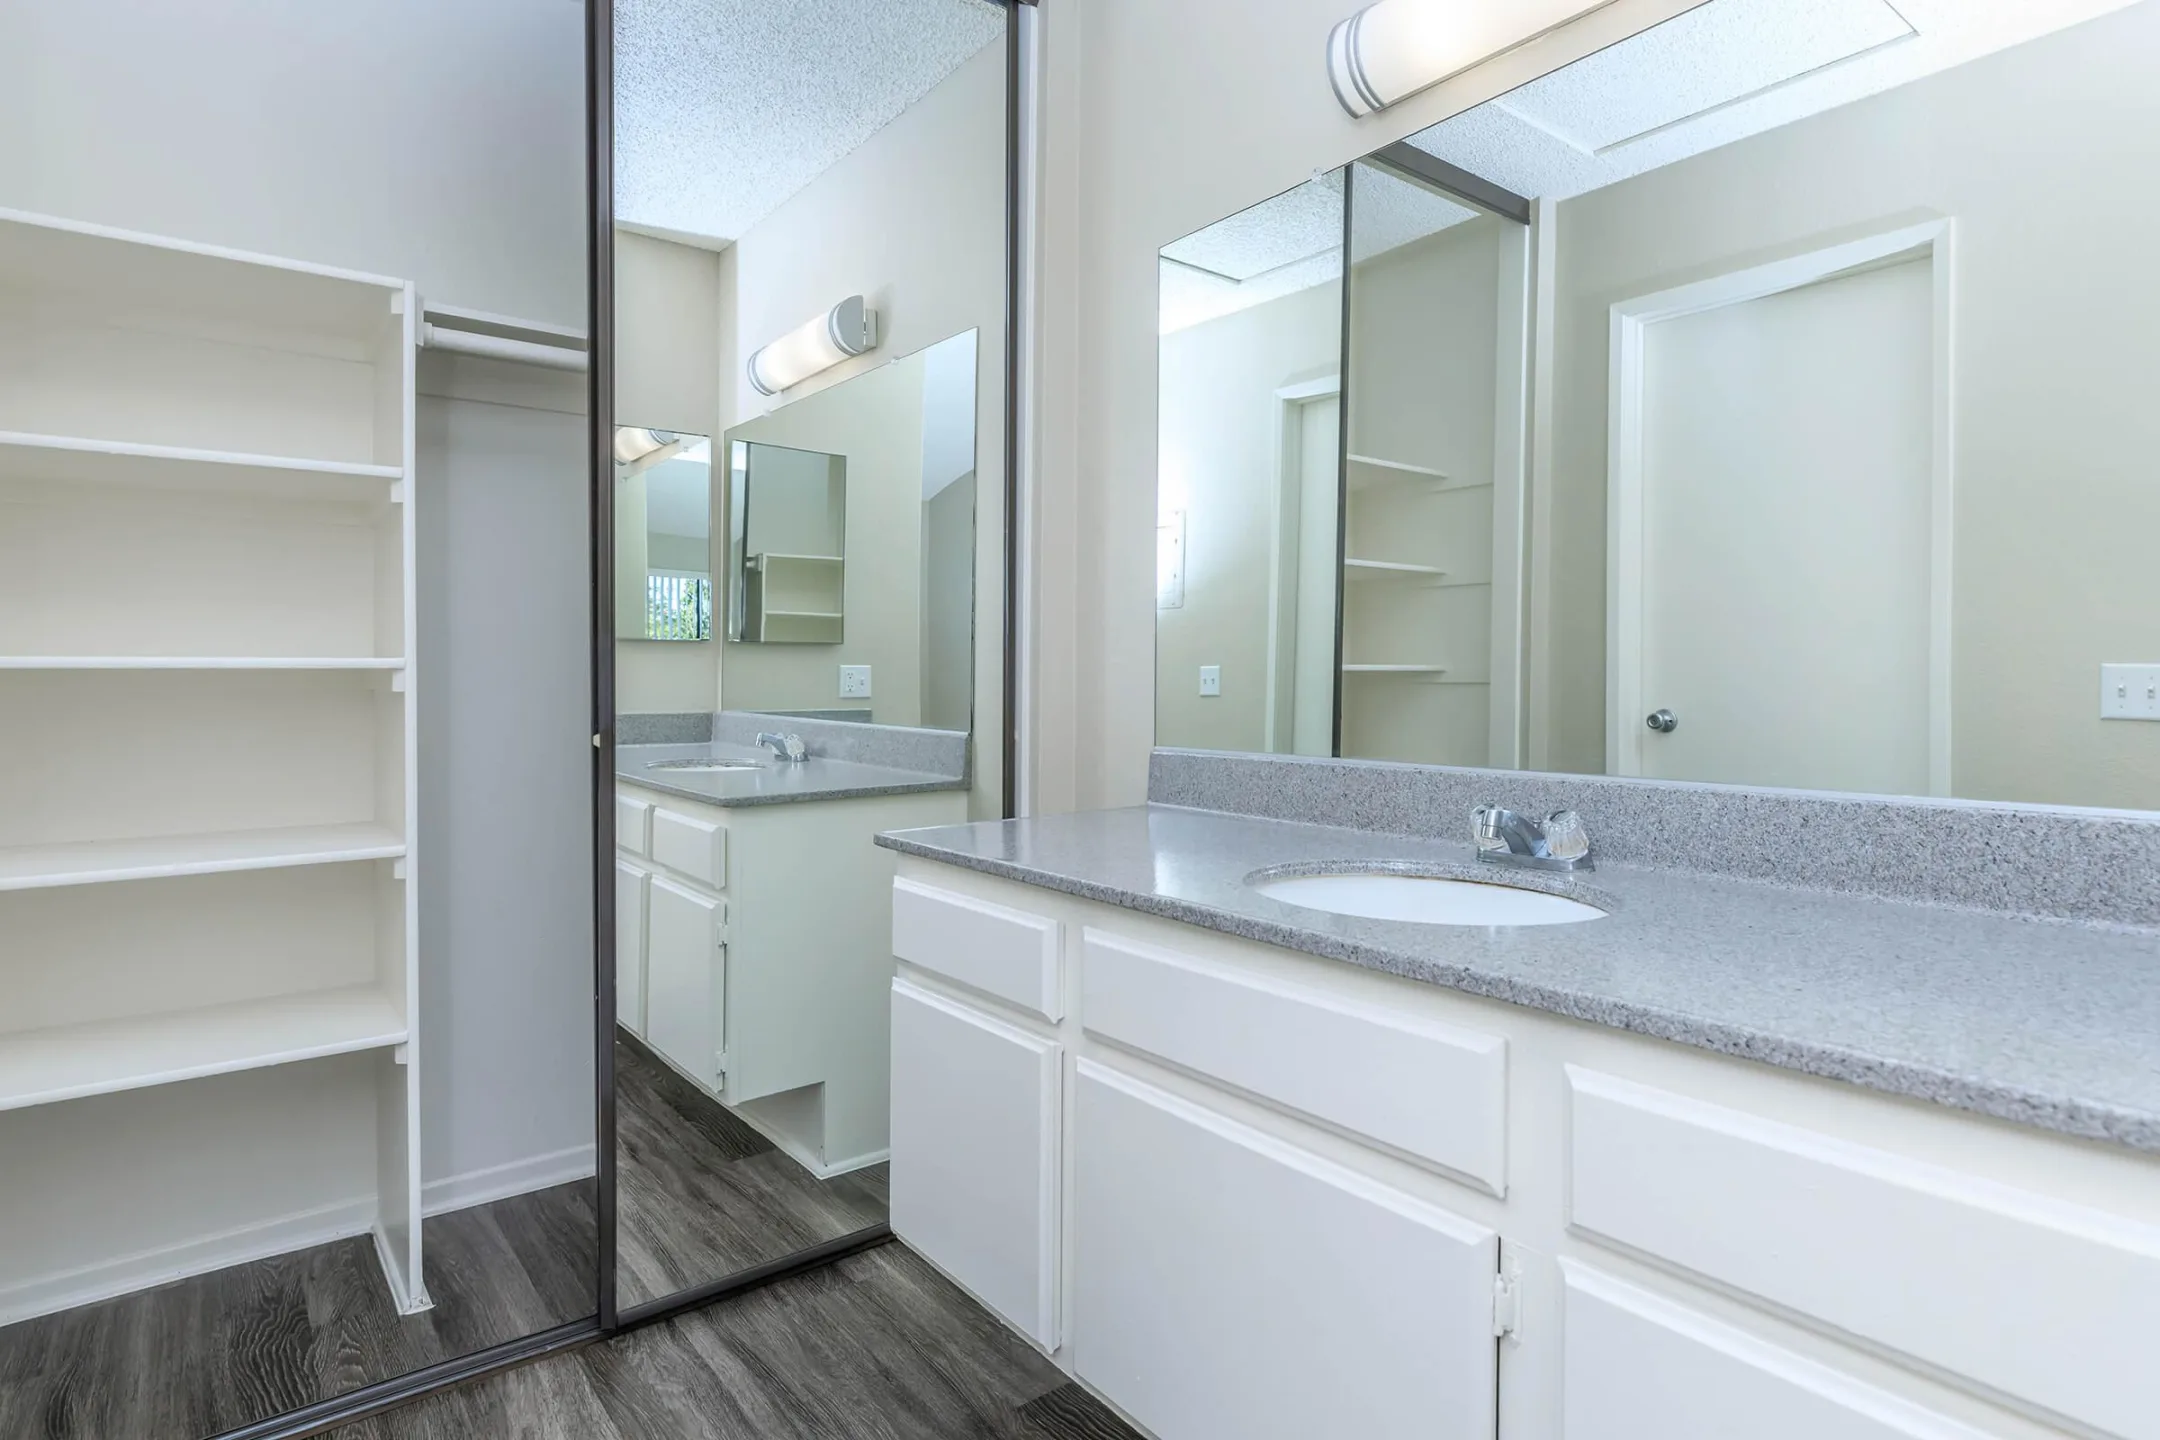 Bathroom - Spring Lakes Apartment Homes - Lake Forest, CA